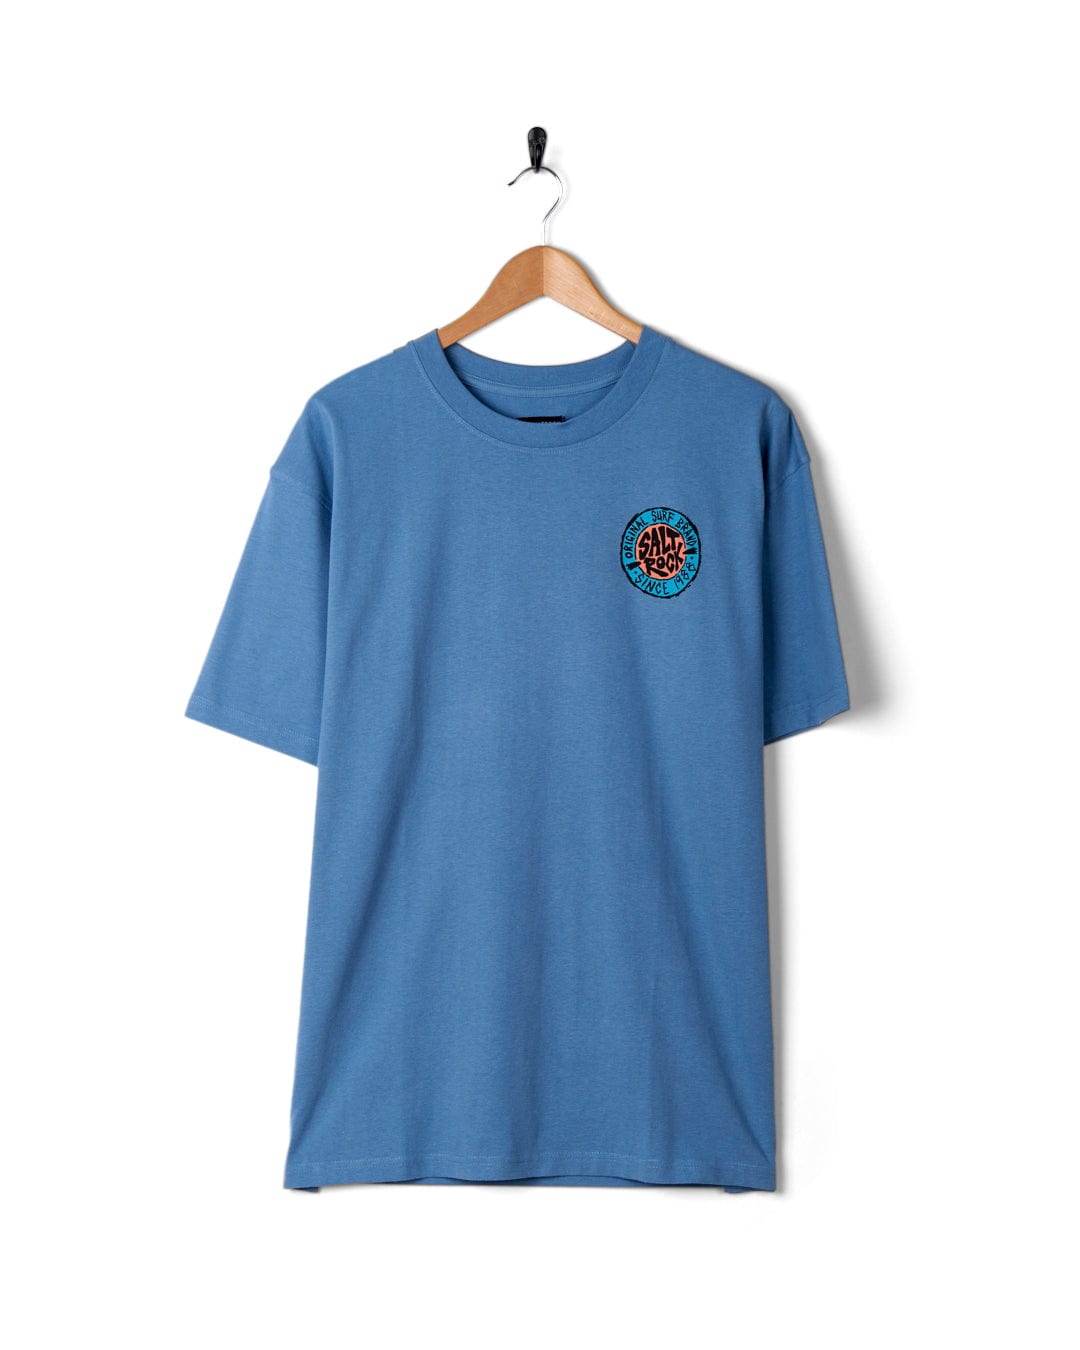 Saltrock SR Original - Mens Short Sleeve T-Shirt - Blue oversized fit with a small logo on the chest, displayed on a hanger against a white background.